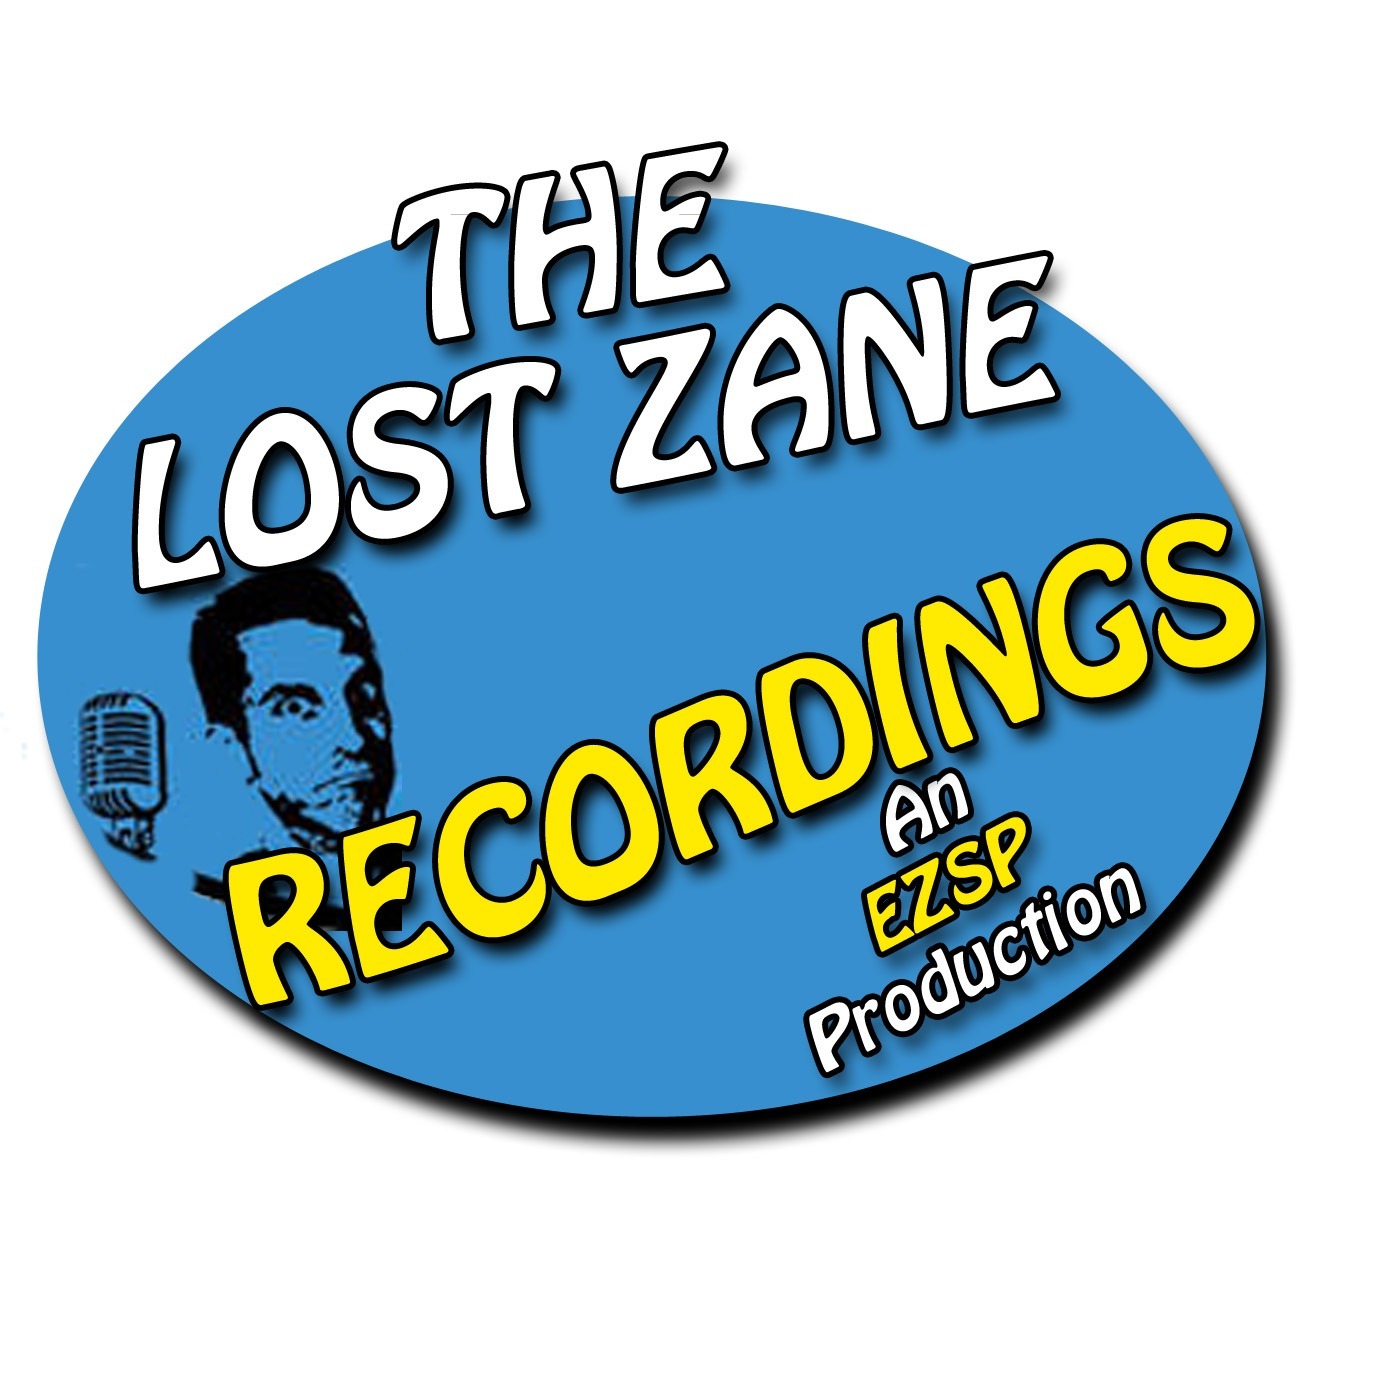 Lost Zane Recordings FREEview - Jim Fouts is a devil